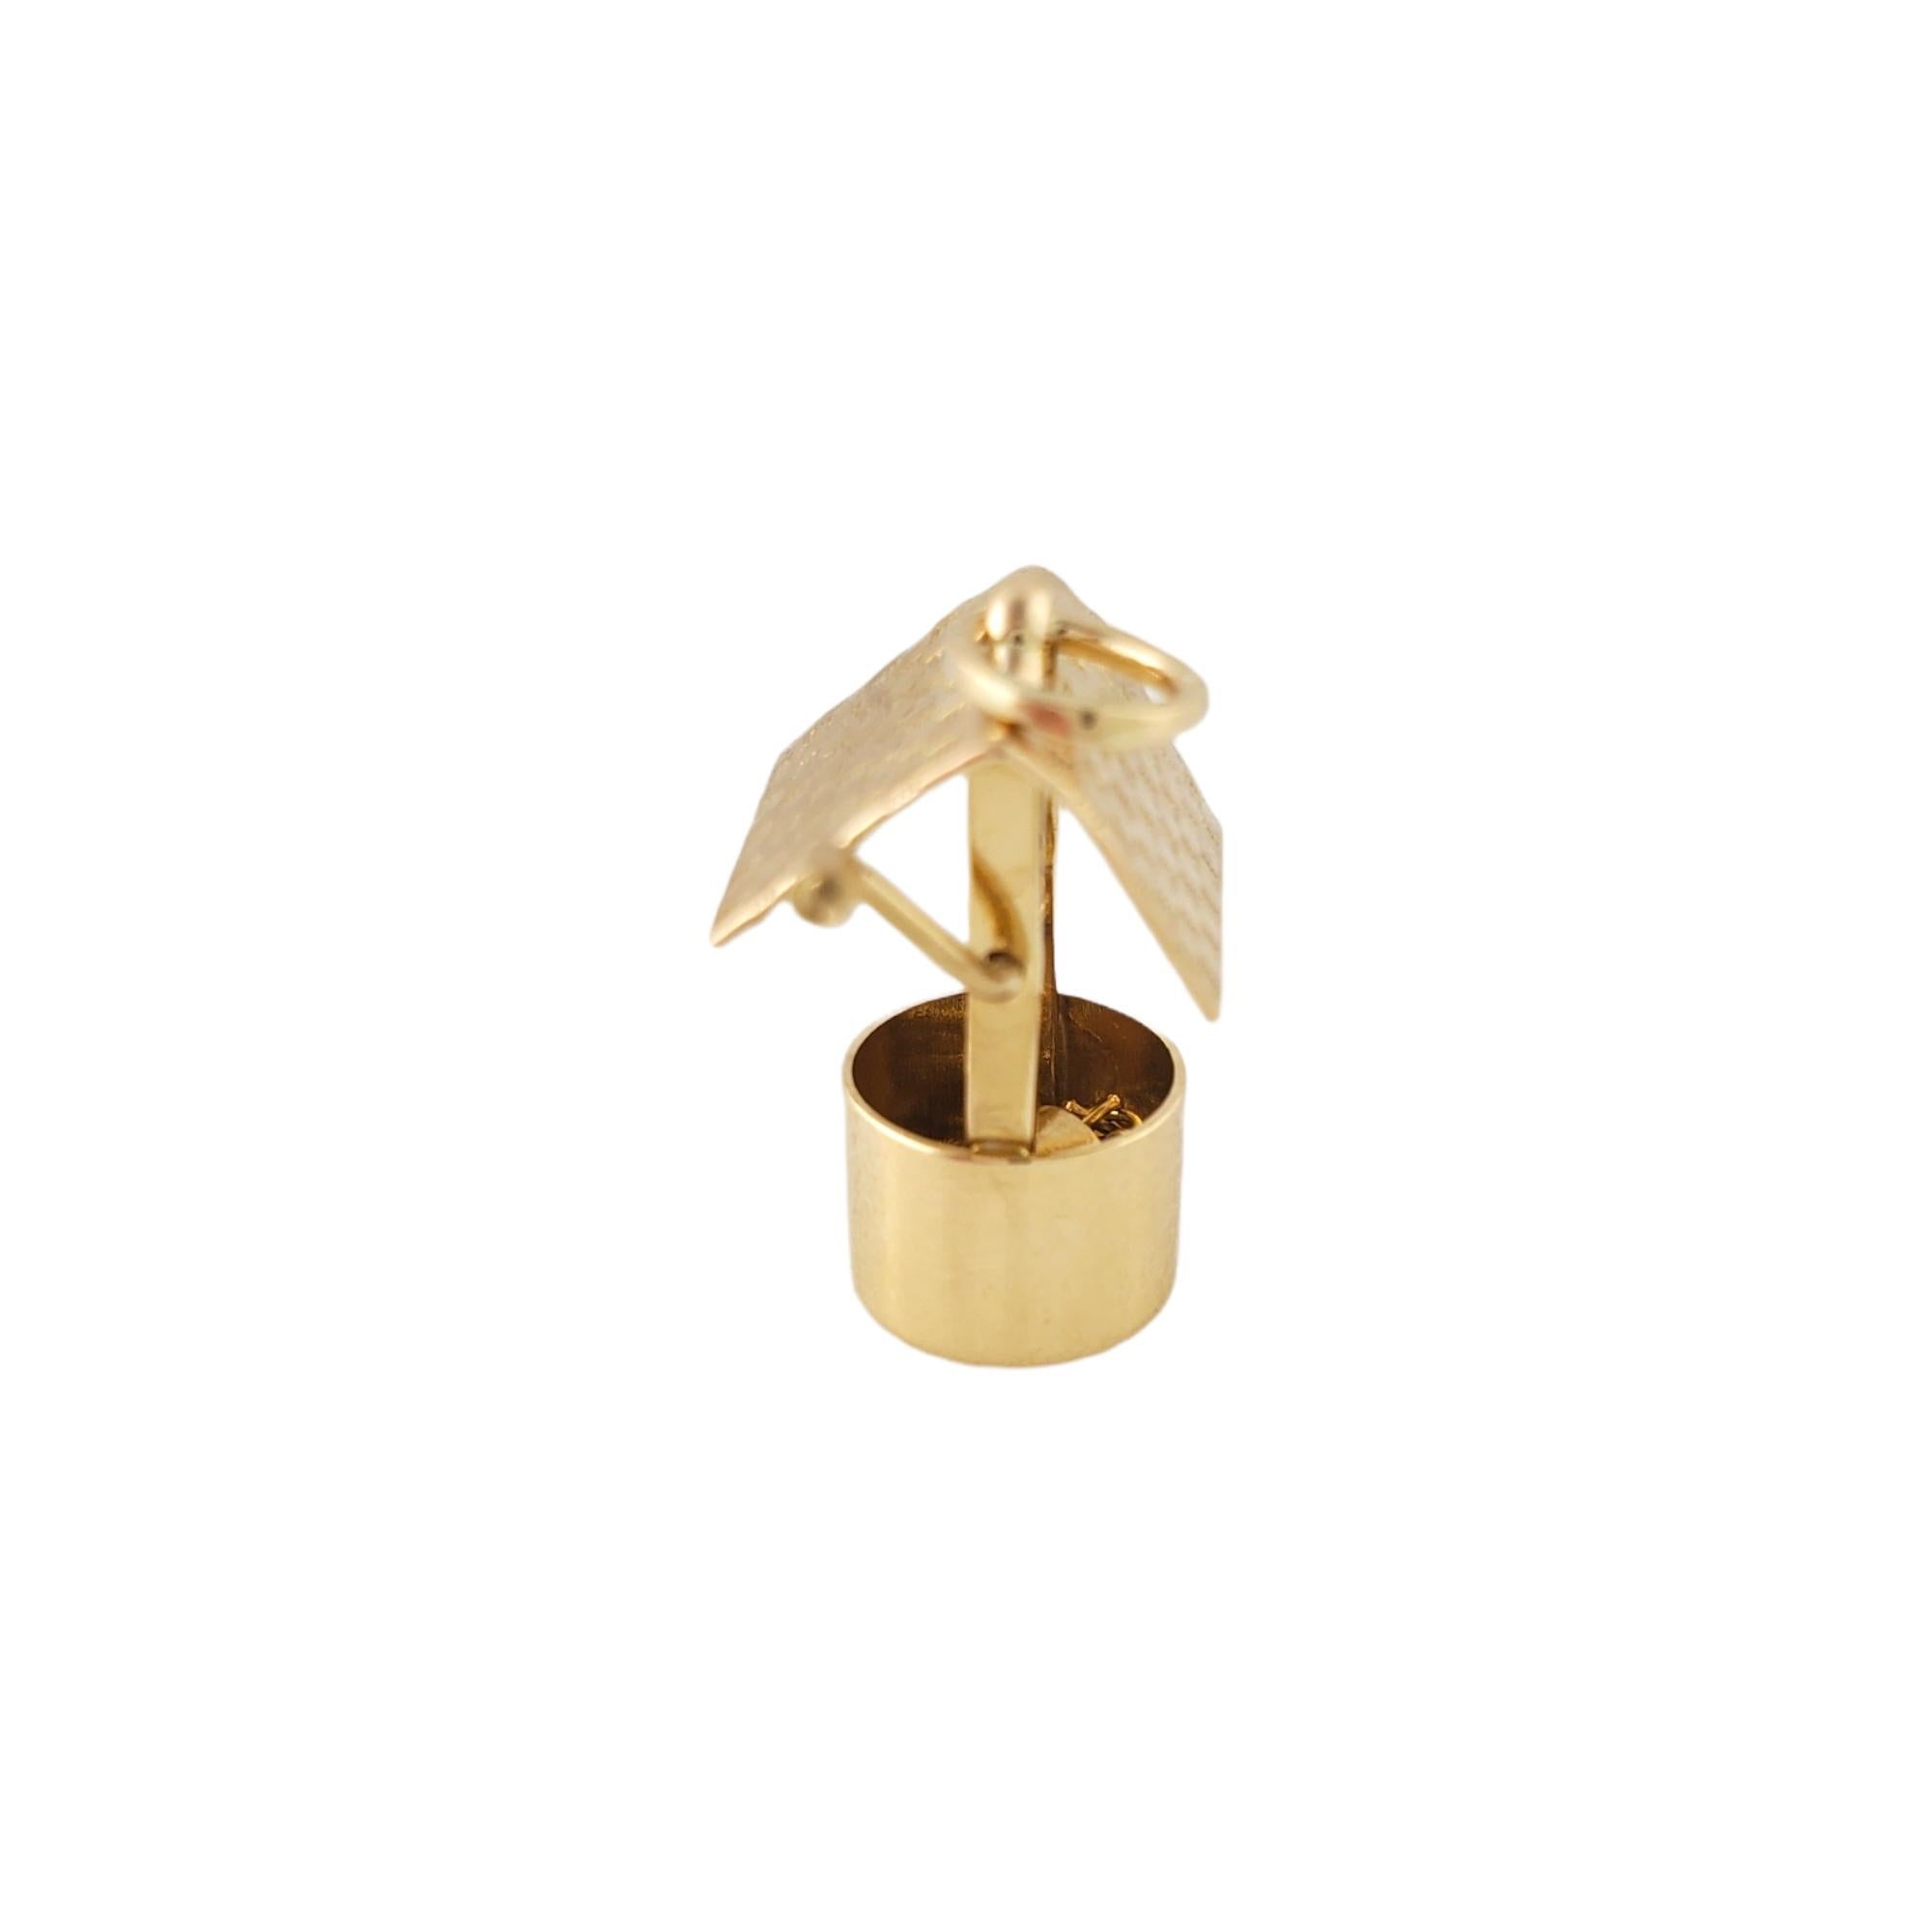 14K Yellow Gold Watering Well Charm  

This beautiful watering well charm will make all your wishes come true! 

Size: 19.45mm X 11.71mm

Weight: 2.5 gr / 1.6 dwt

Hallmark: 14K

Very good condition, professionally polished.

Will come packaged in a